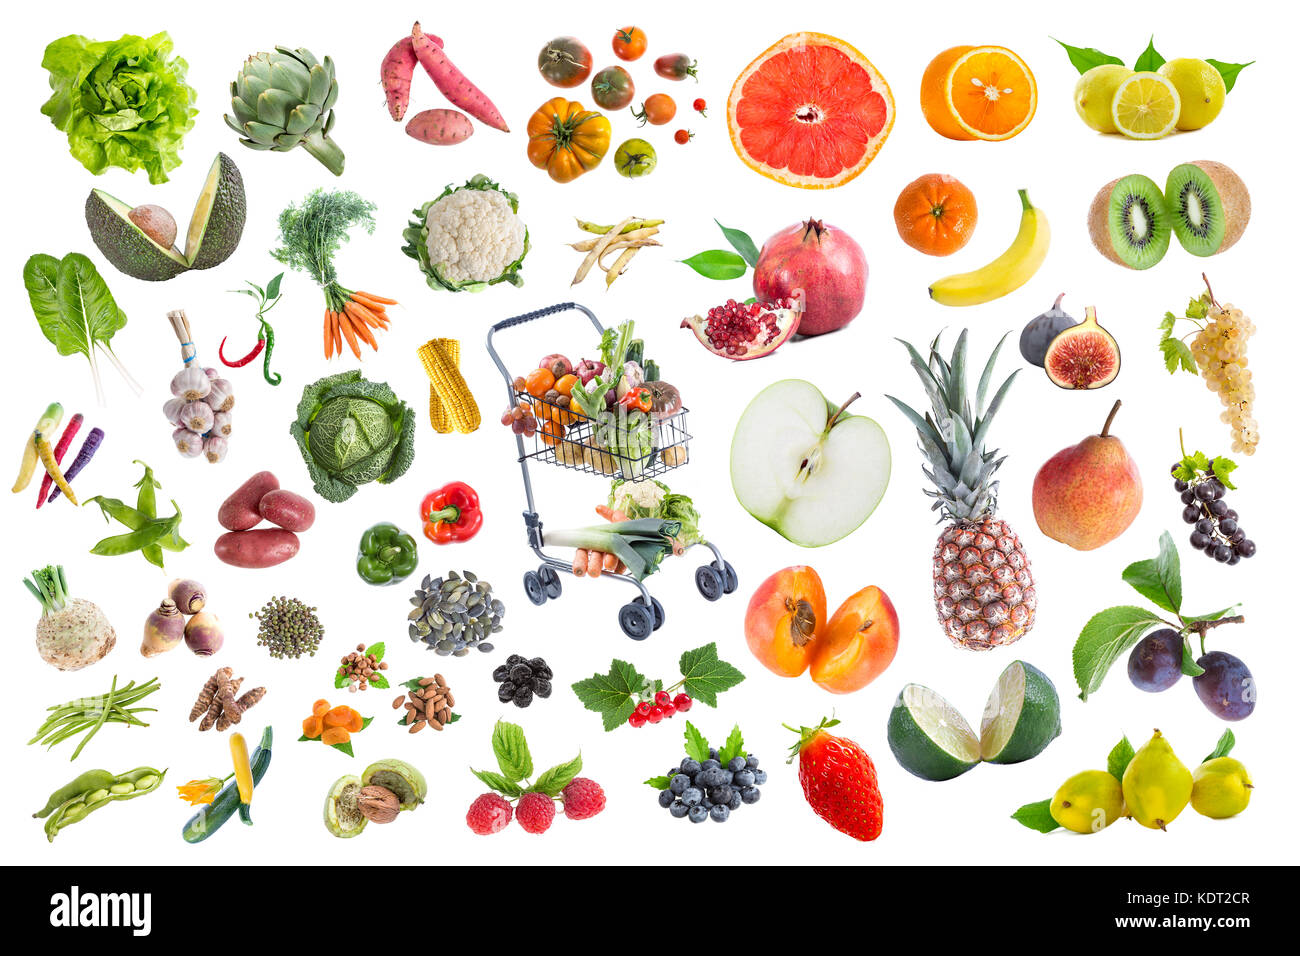 Concept of healthy food, Various Fruits and vegetables to eat five a day on withte background with a full grocery shopping cart in the middle Stock Photo